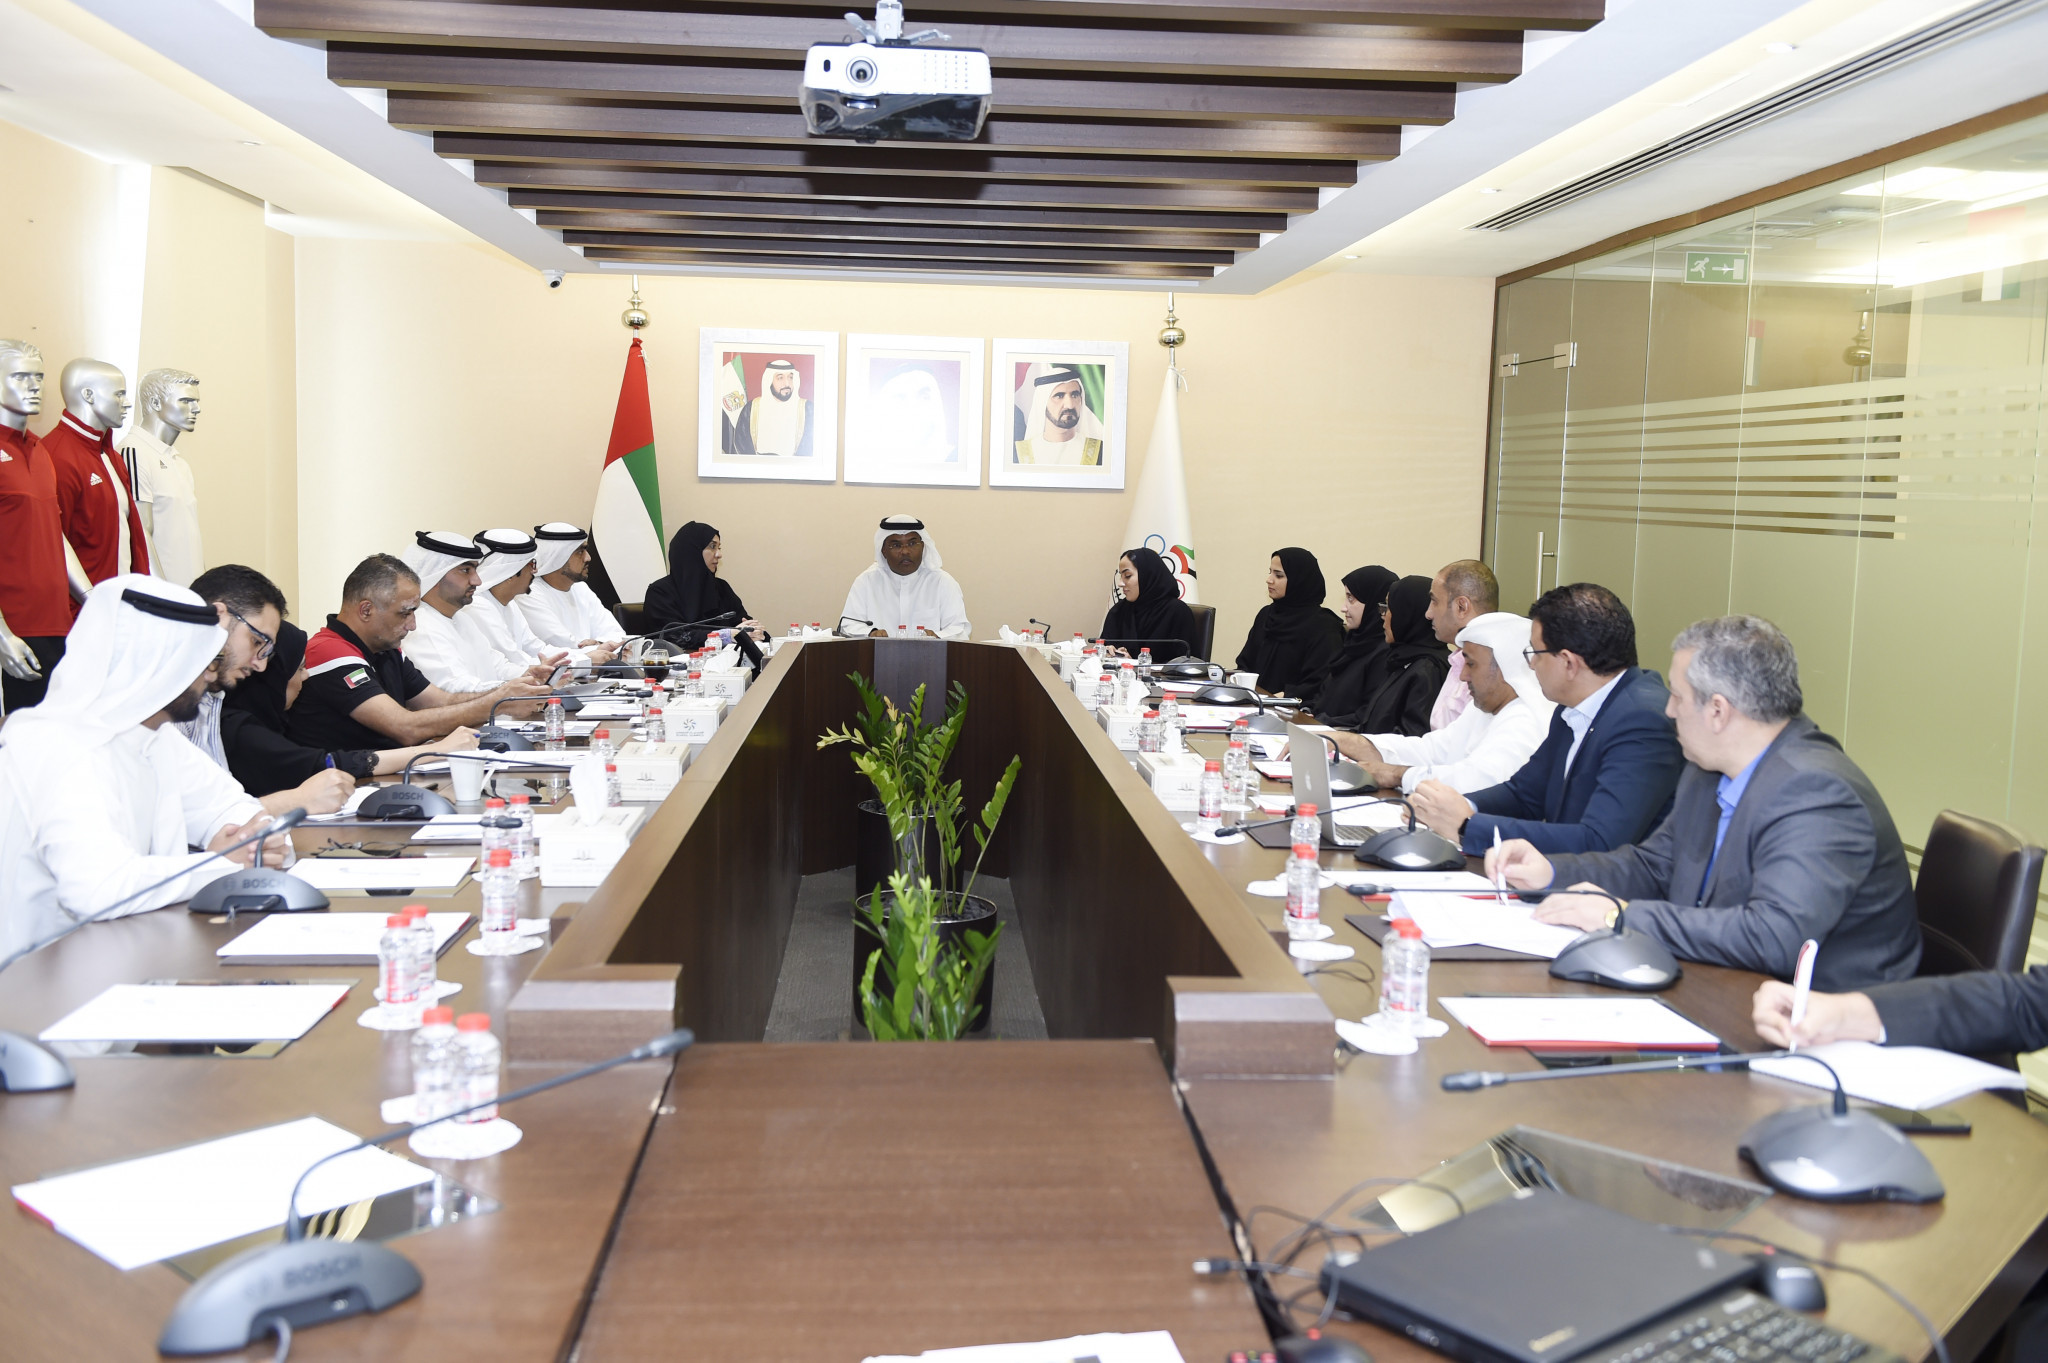 UAE NOC host meeting to prepare for Women's Sports Games